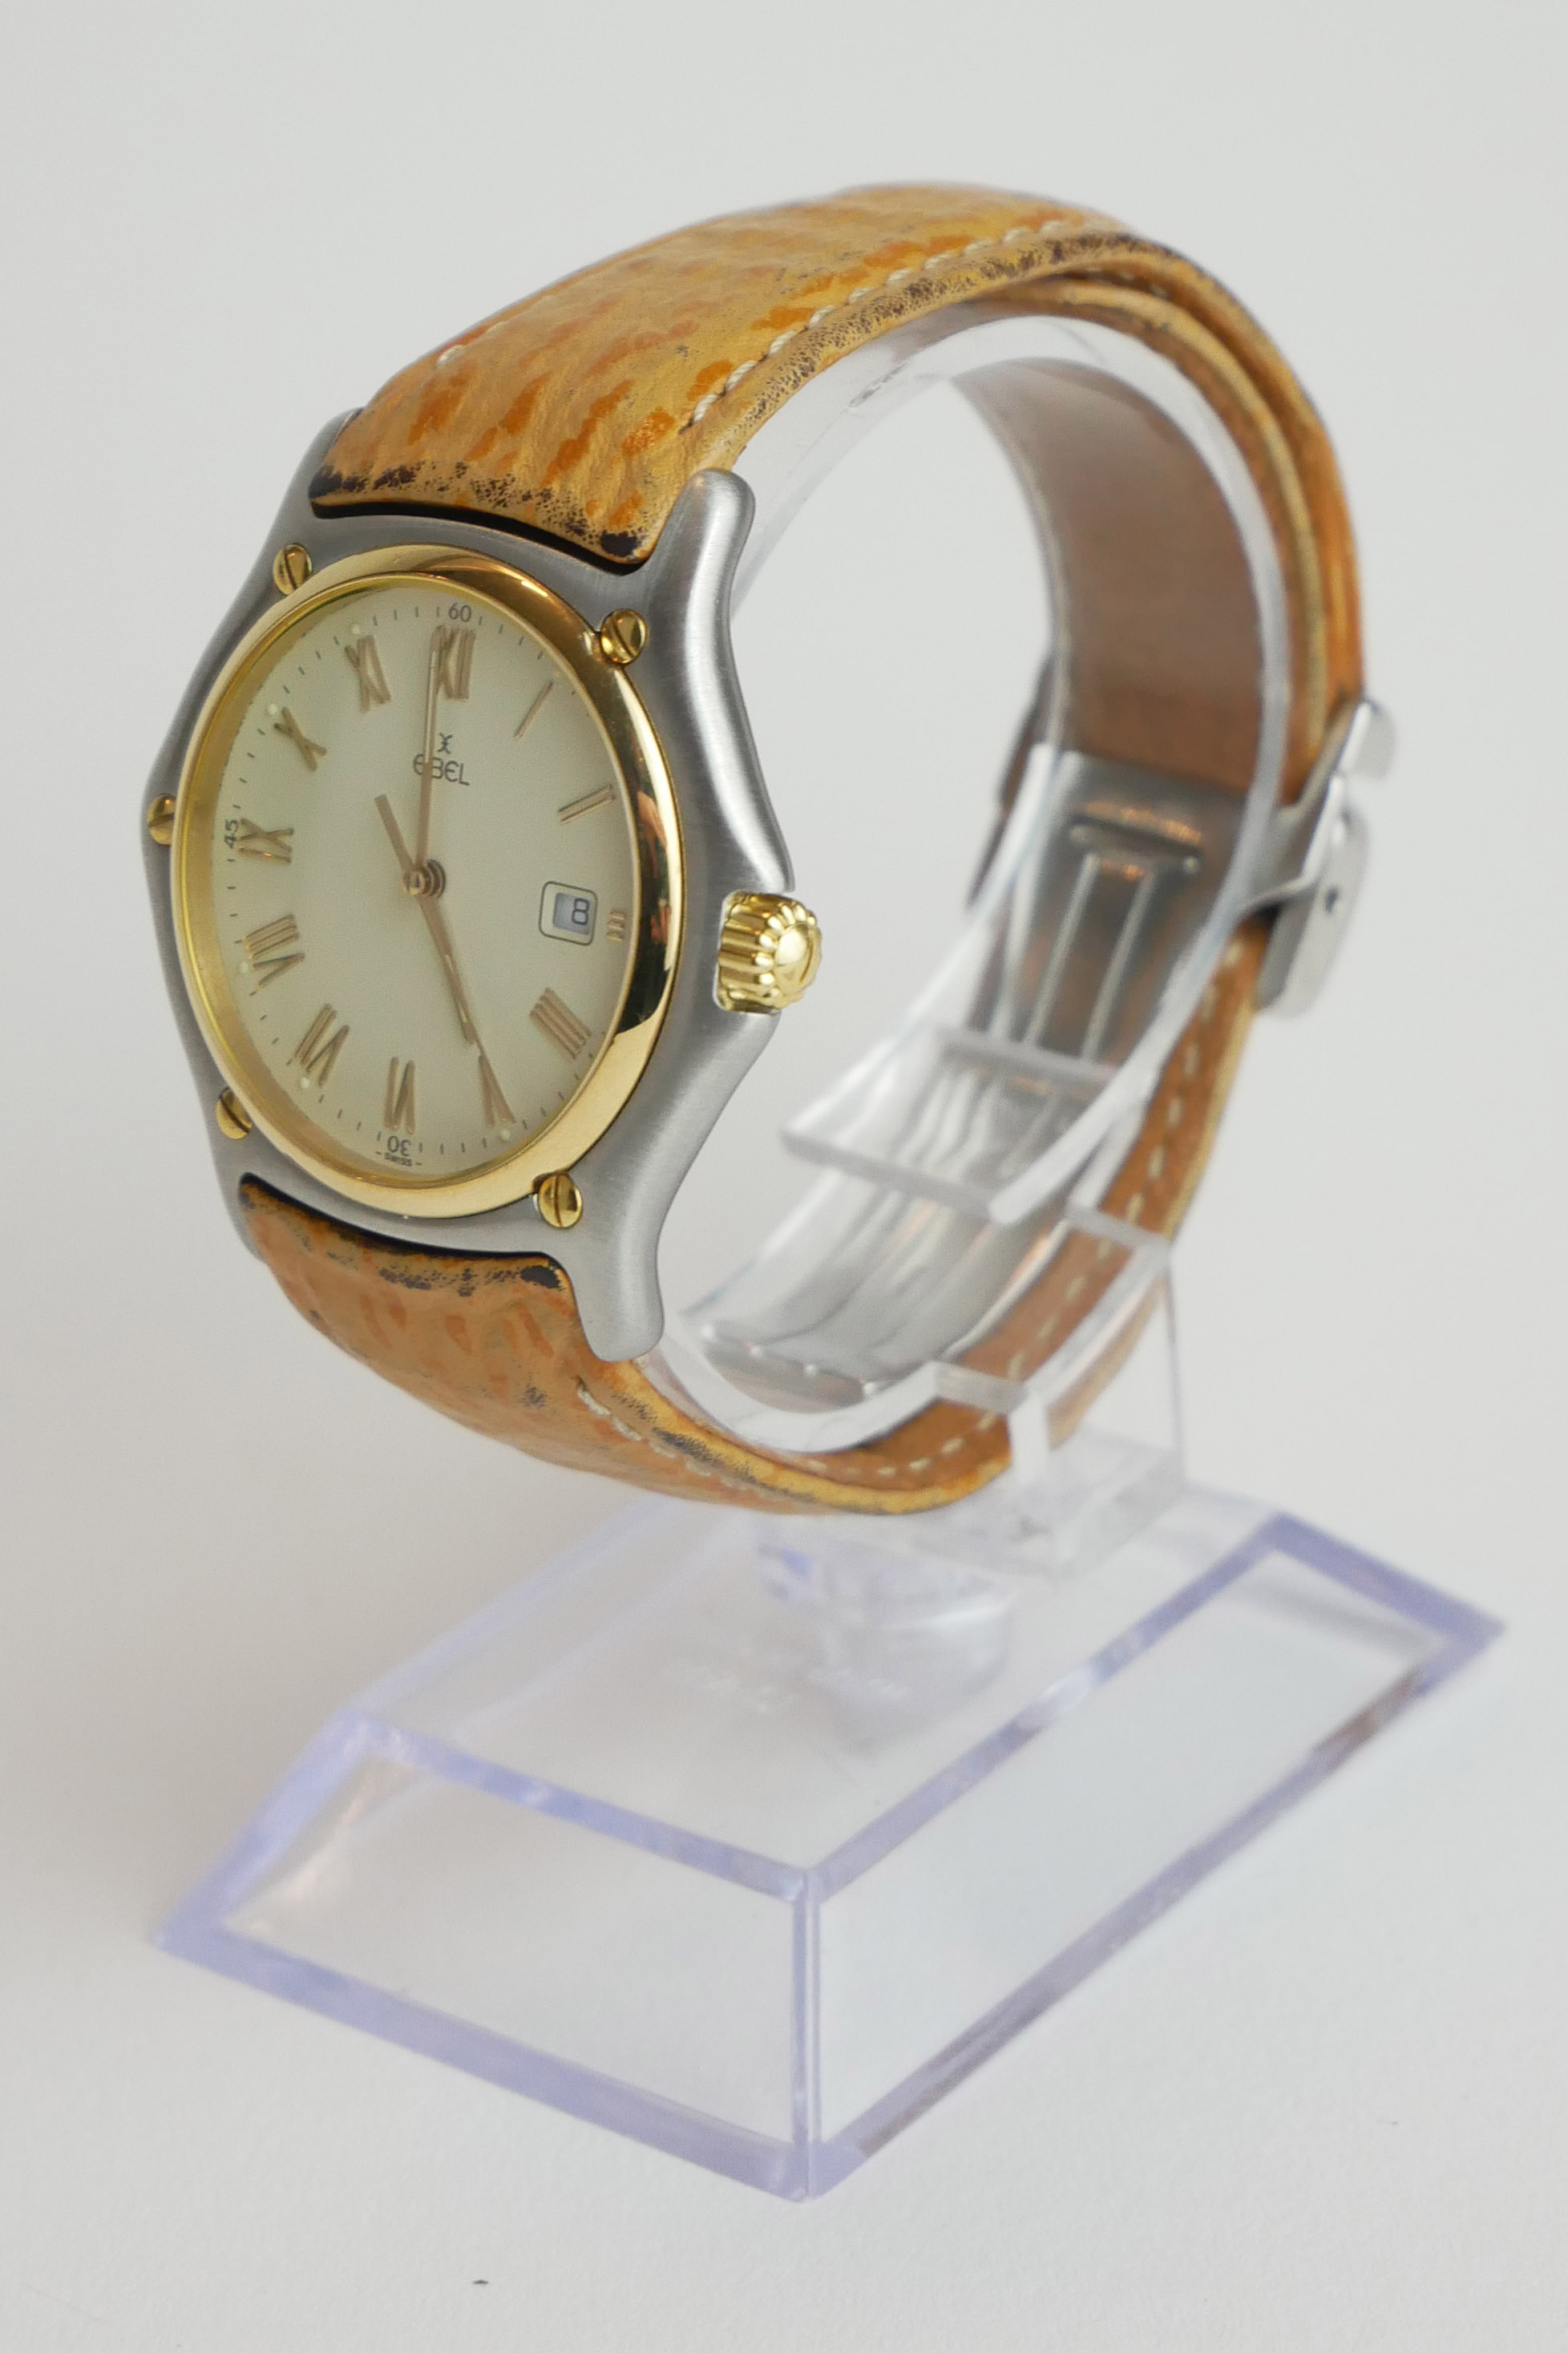 EBEL, 1911, A STAINLESS STEEL AND 18CT GOLD GENT'S WRISTWATCH Having a gold bezel and calendar - Image 2 of 3